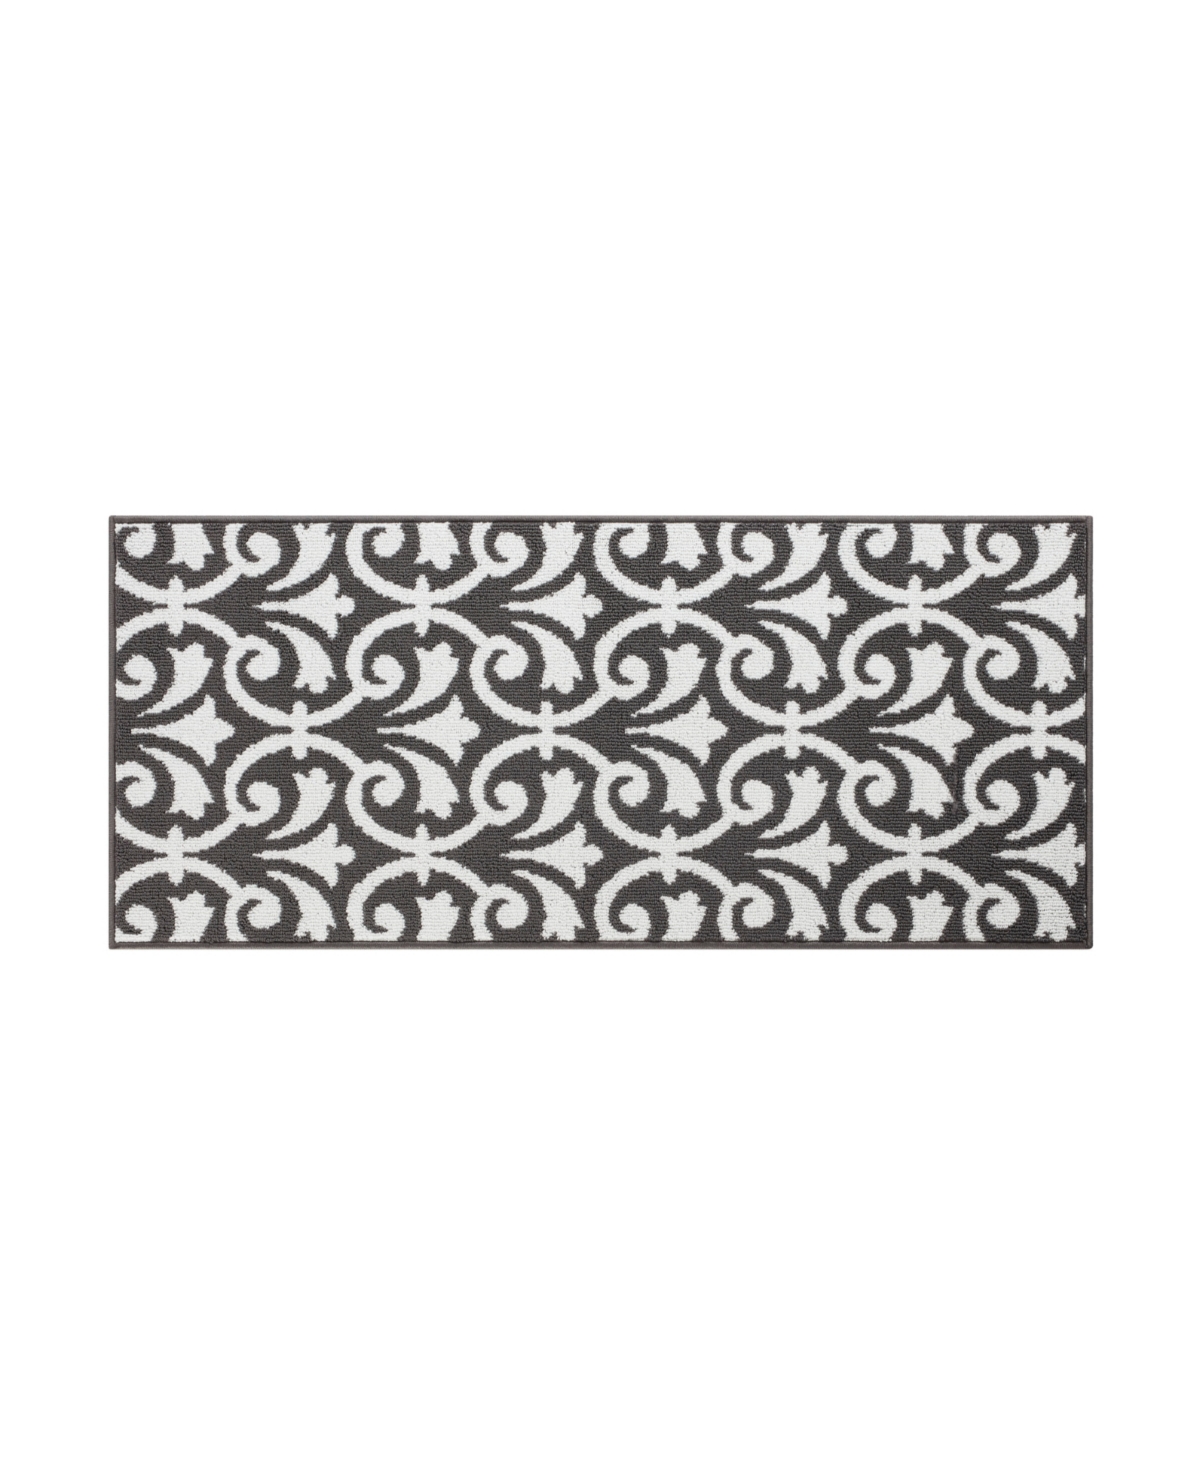 Jean Pierre Karb Floral Scroll Tufted- Machine Washable Runner Rug, 26" X 60" In Dark Gray And White